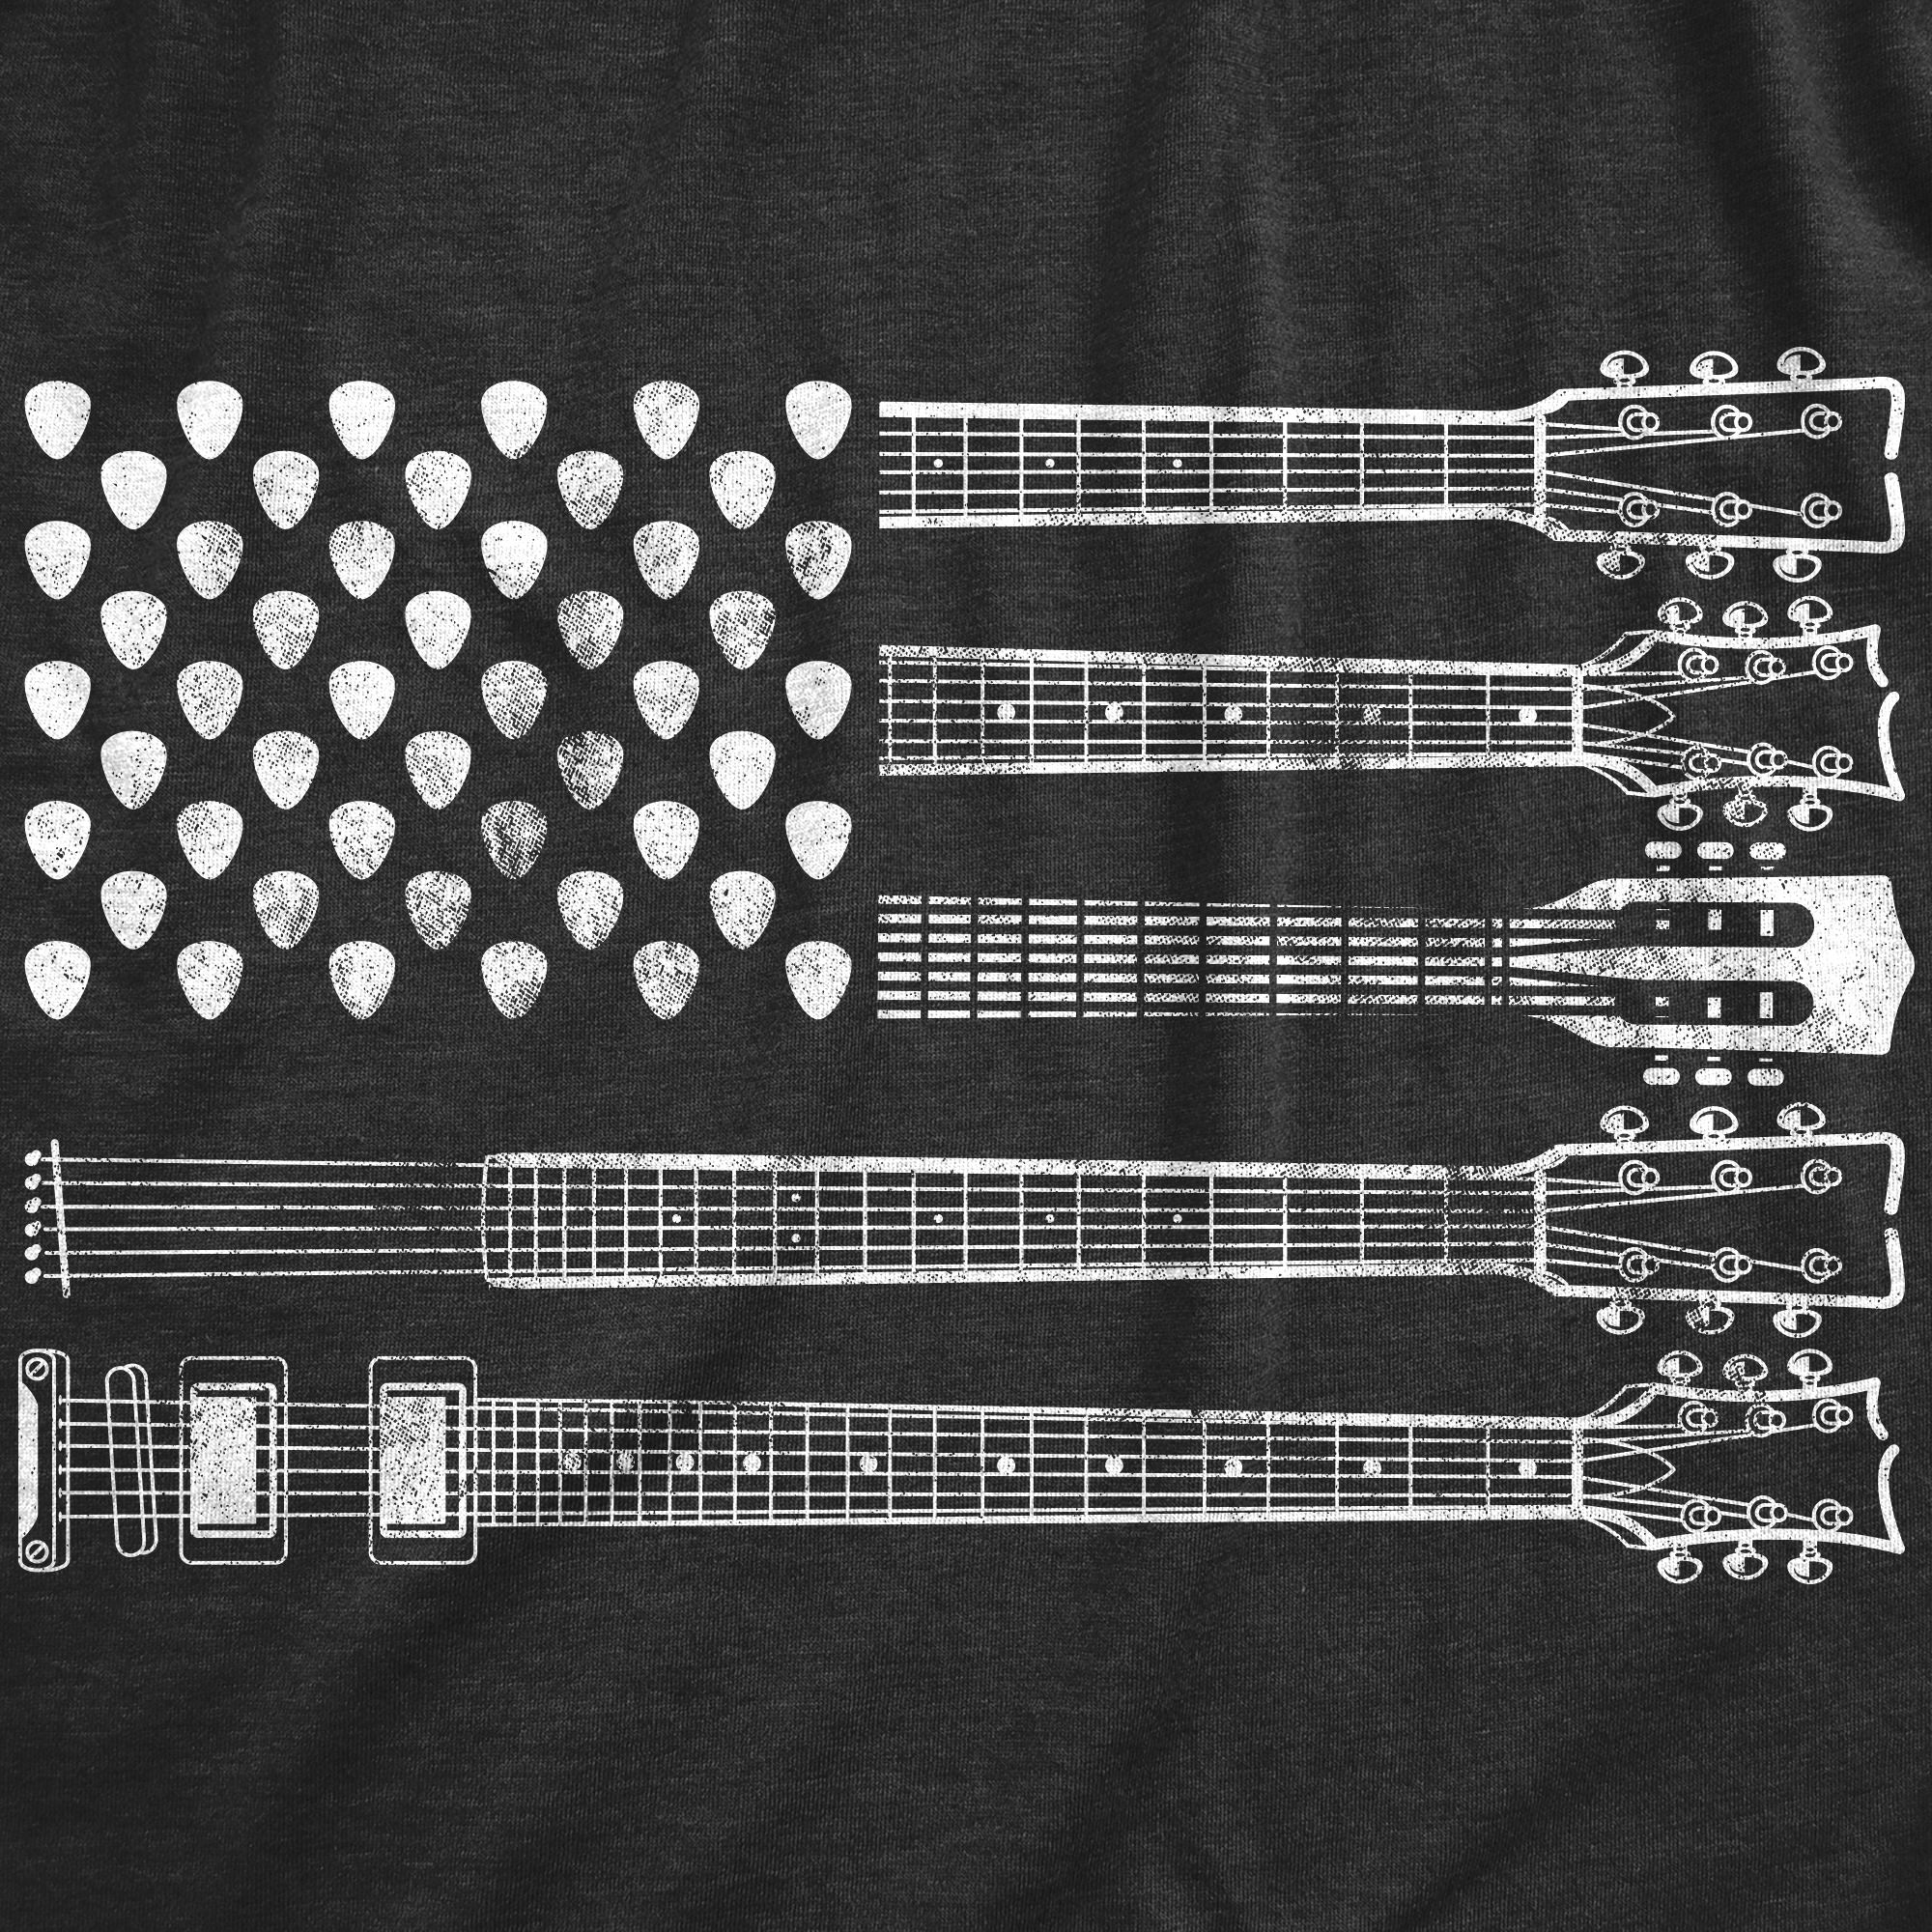 Crazy Dog Tshirts Womens Guitar Flag Tshirt Cool Rock And Roll 4th of July Musician Flag Graphic Novelty Tee